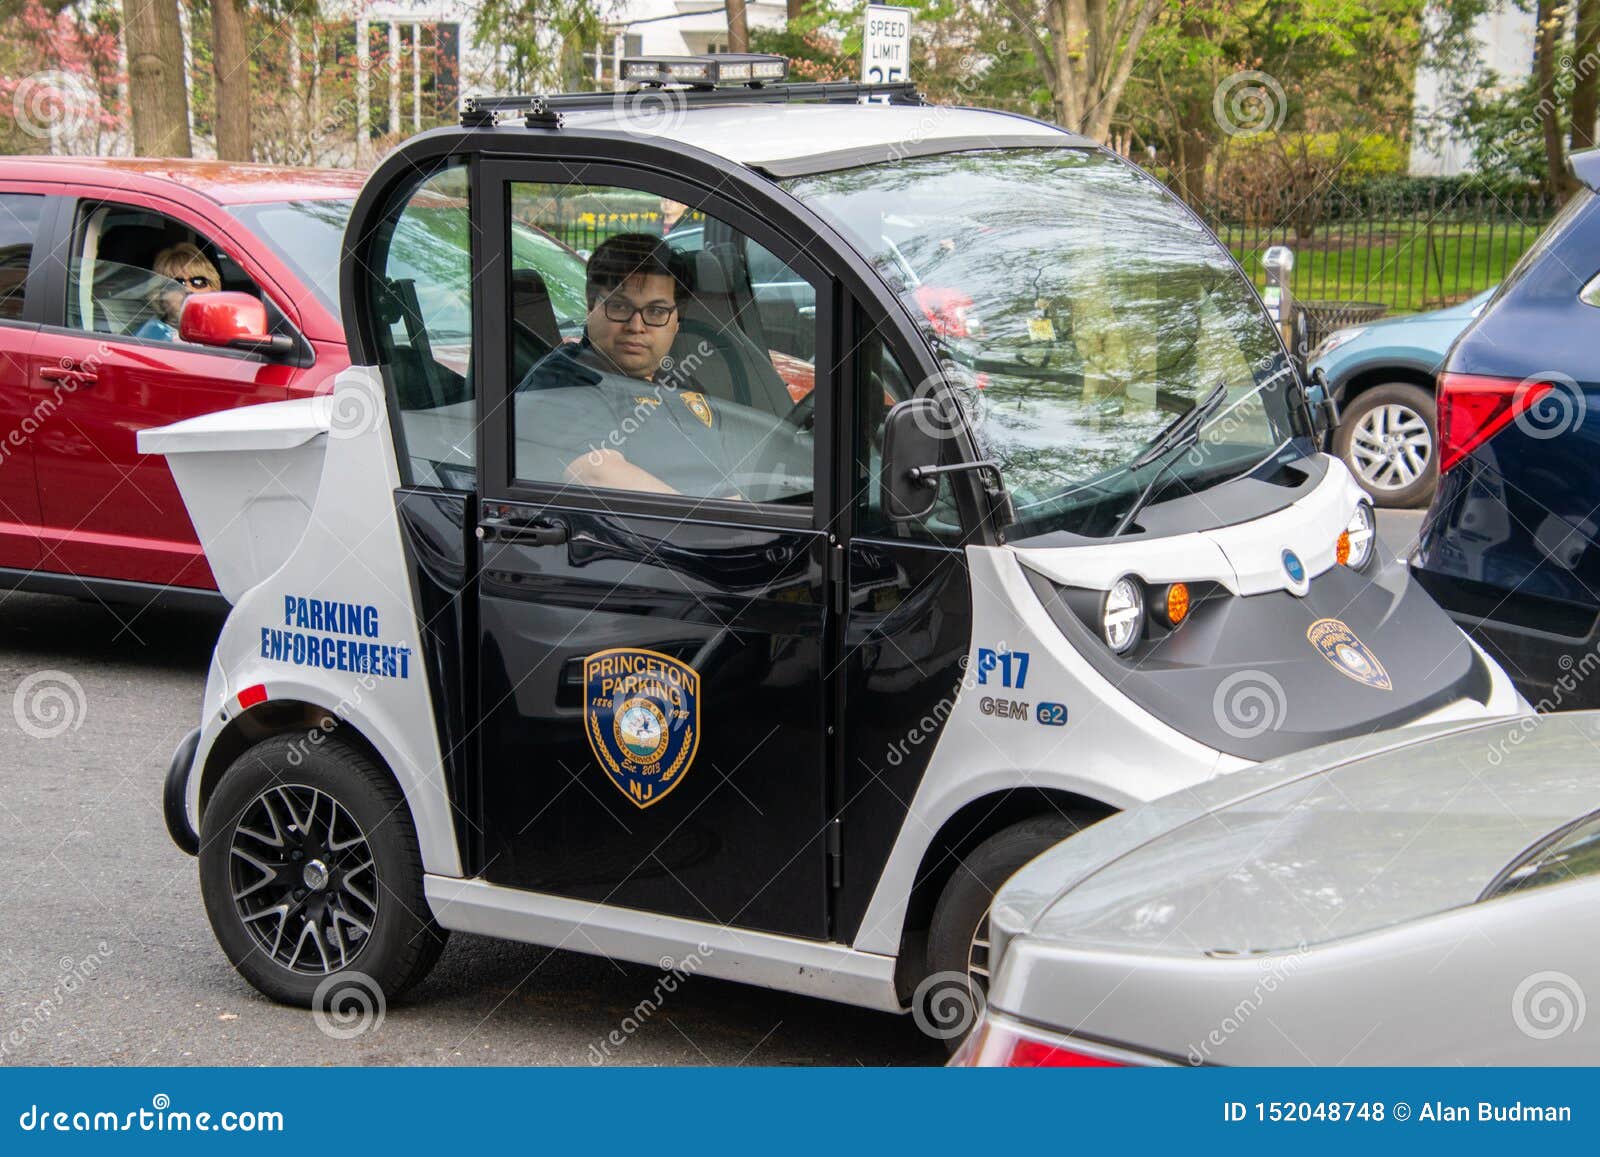 small electric smart car gem made polaris seen being used as parking enforcement vehicle princeton police officer new image